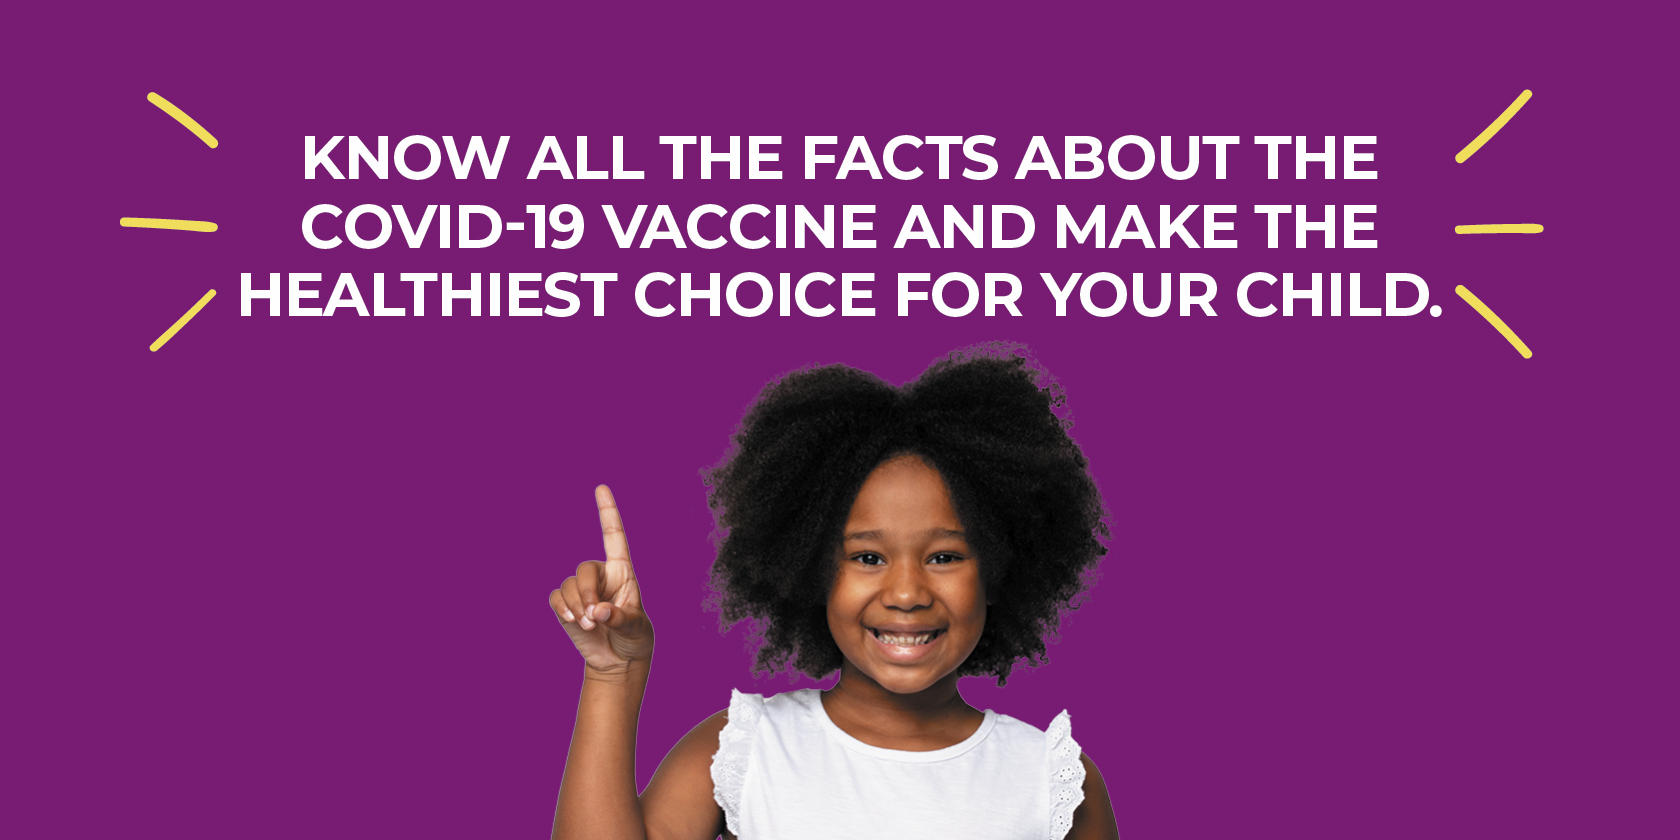 Know all the facts about the COVID-19 Vaccine and make the healthiest choice for your child.